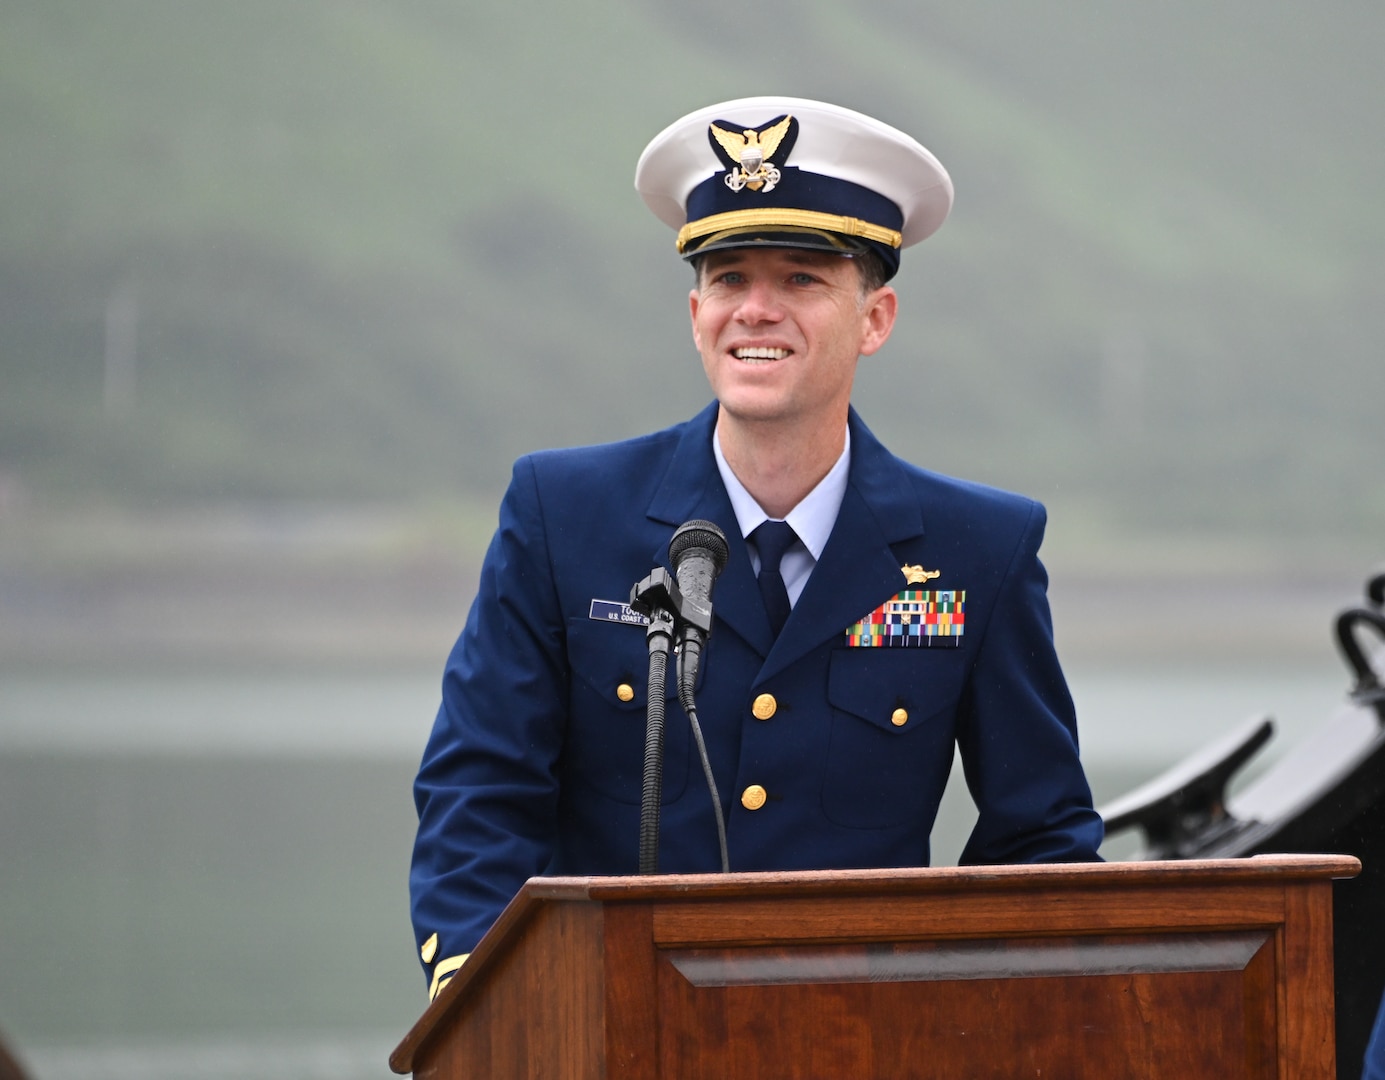 U.S. Coast Guard Lt. Cdr. James Toohey, commanding officer, Cypress, addresses Cypress personnel and audience members during a change-of-command ceremony at Base Kodiak, Aug. 3, 2023. Toohey reported to Cypress from the Shore Infrastructure Logistics Center in Norfolk, Virginia, where he served as the Depot Level Maintenance Program Manager. U.S. Coast Guard photo by Petty Officer 3rd Class Ian Gray.